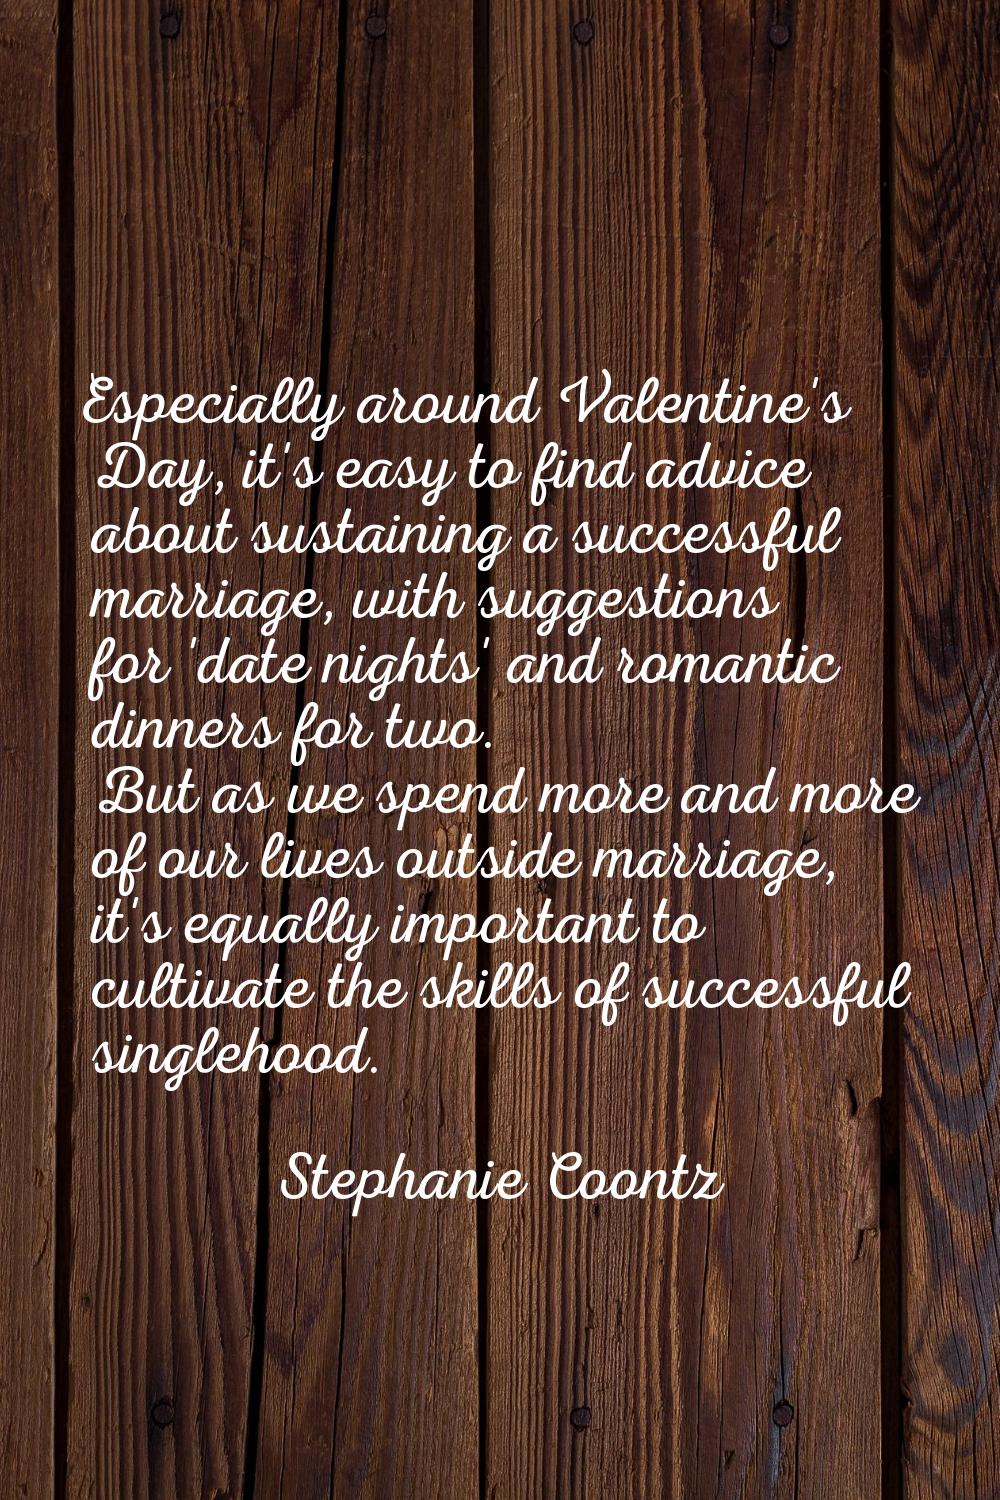 Especially around Valentine's Day, it's easy to find advice about sustaining a successful marriage,